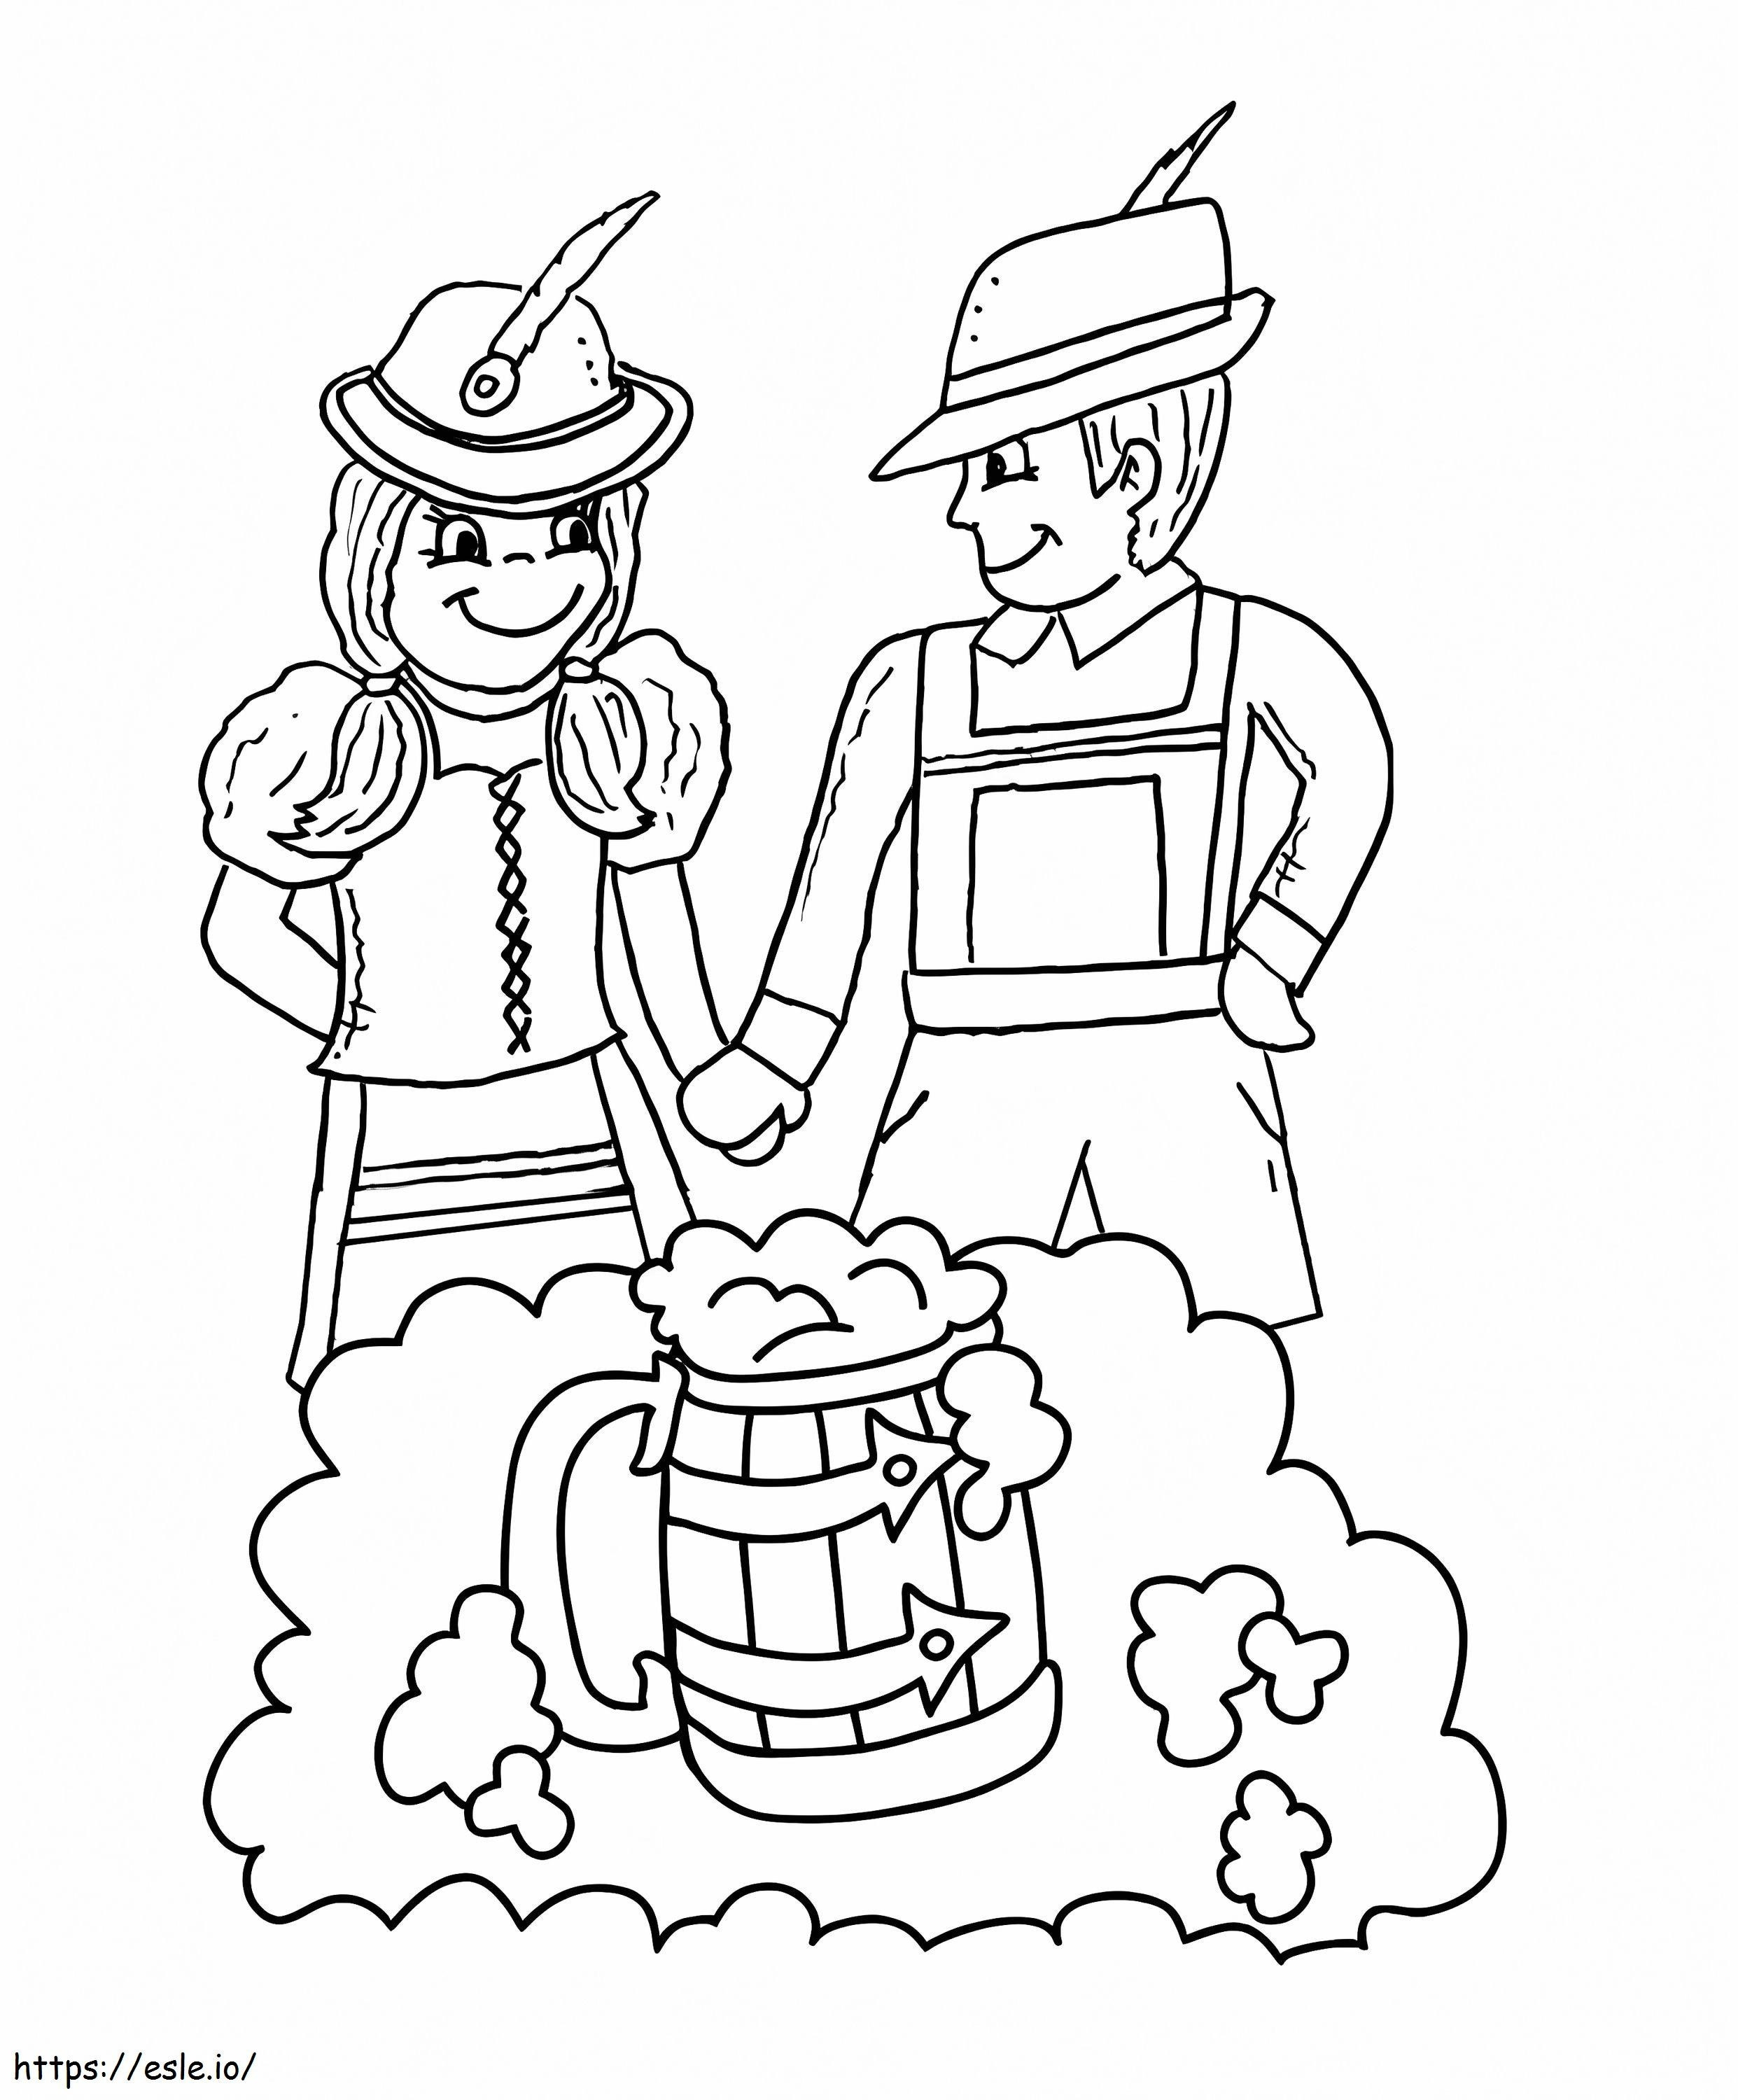 Oktoberfest 10 coloring page